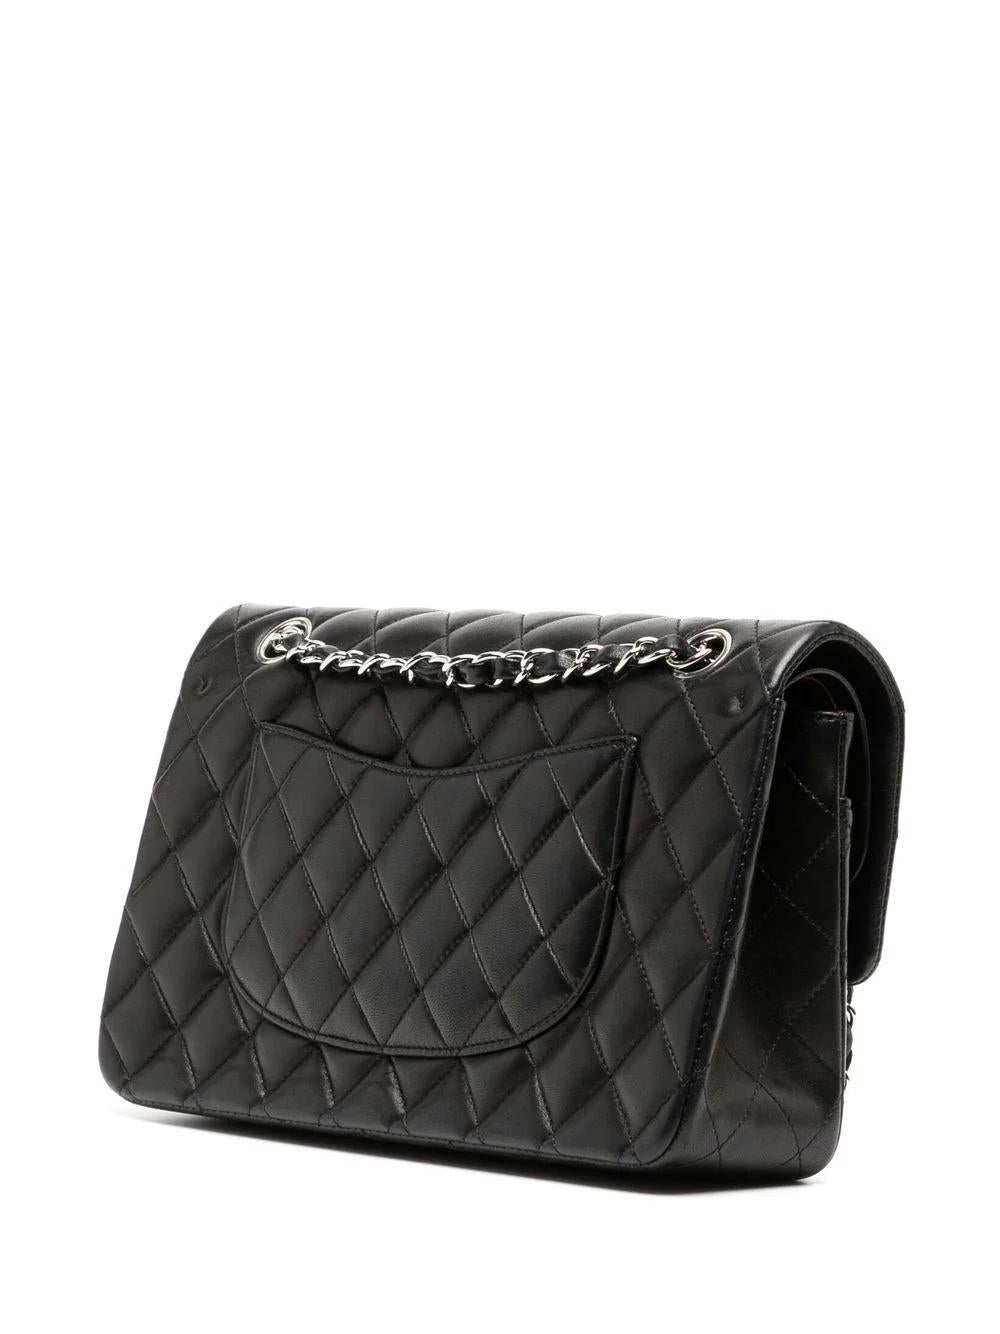 Chanel 2006 Vintage 2.55 Quilted Lambskin Medium Classic Double Flap Bag  1